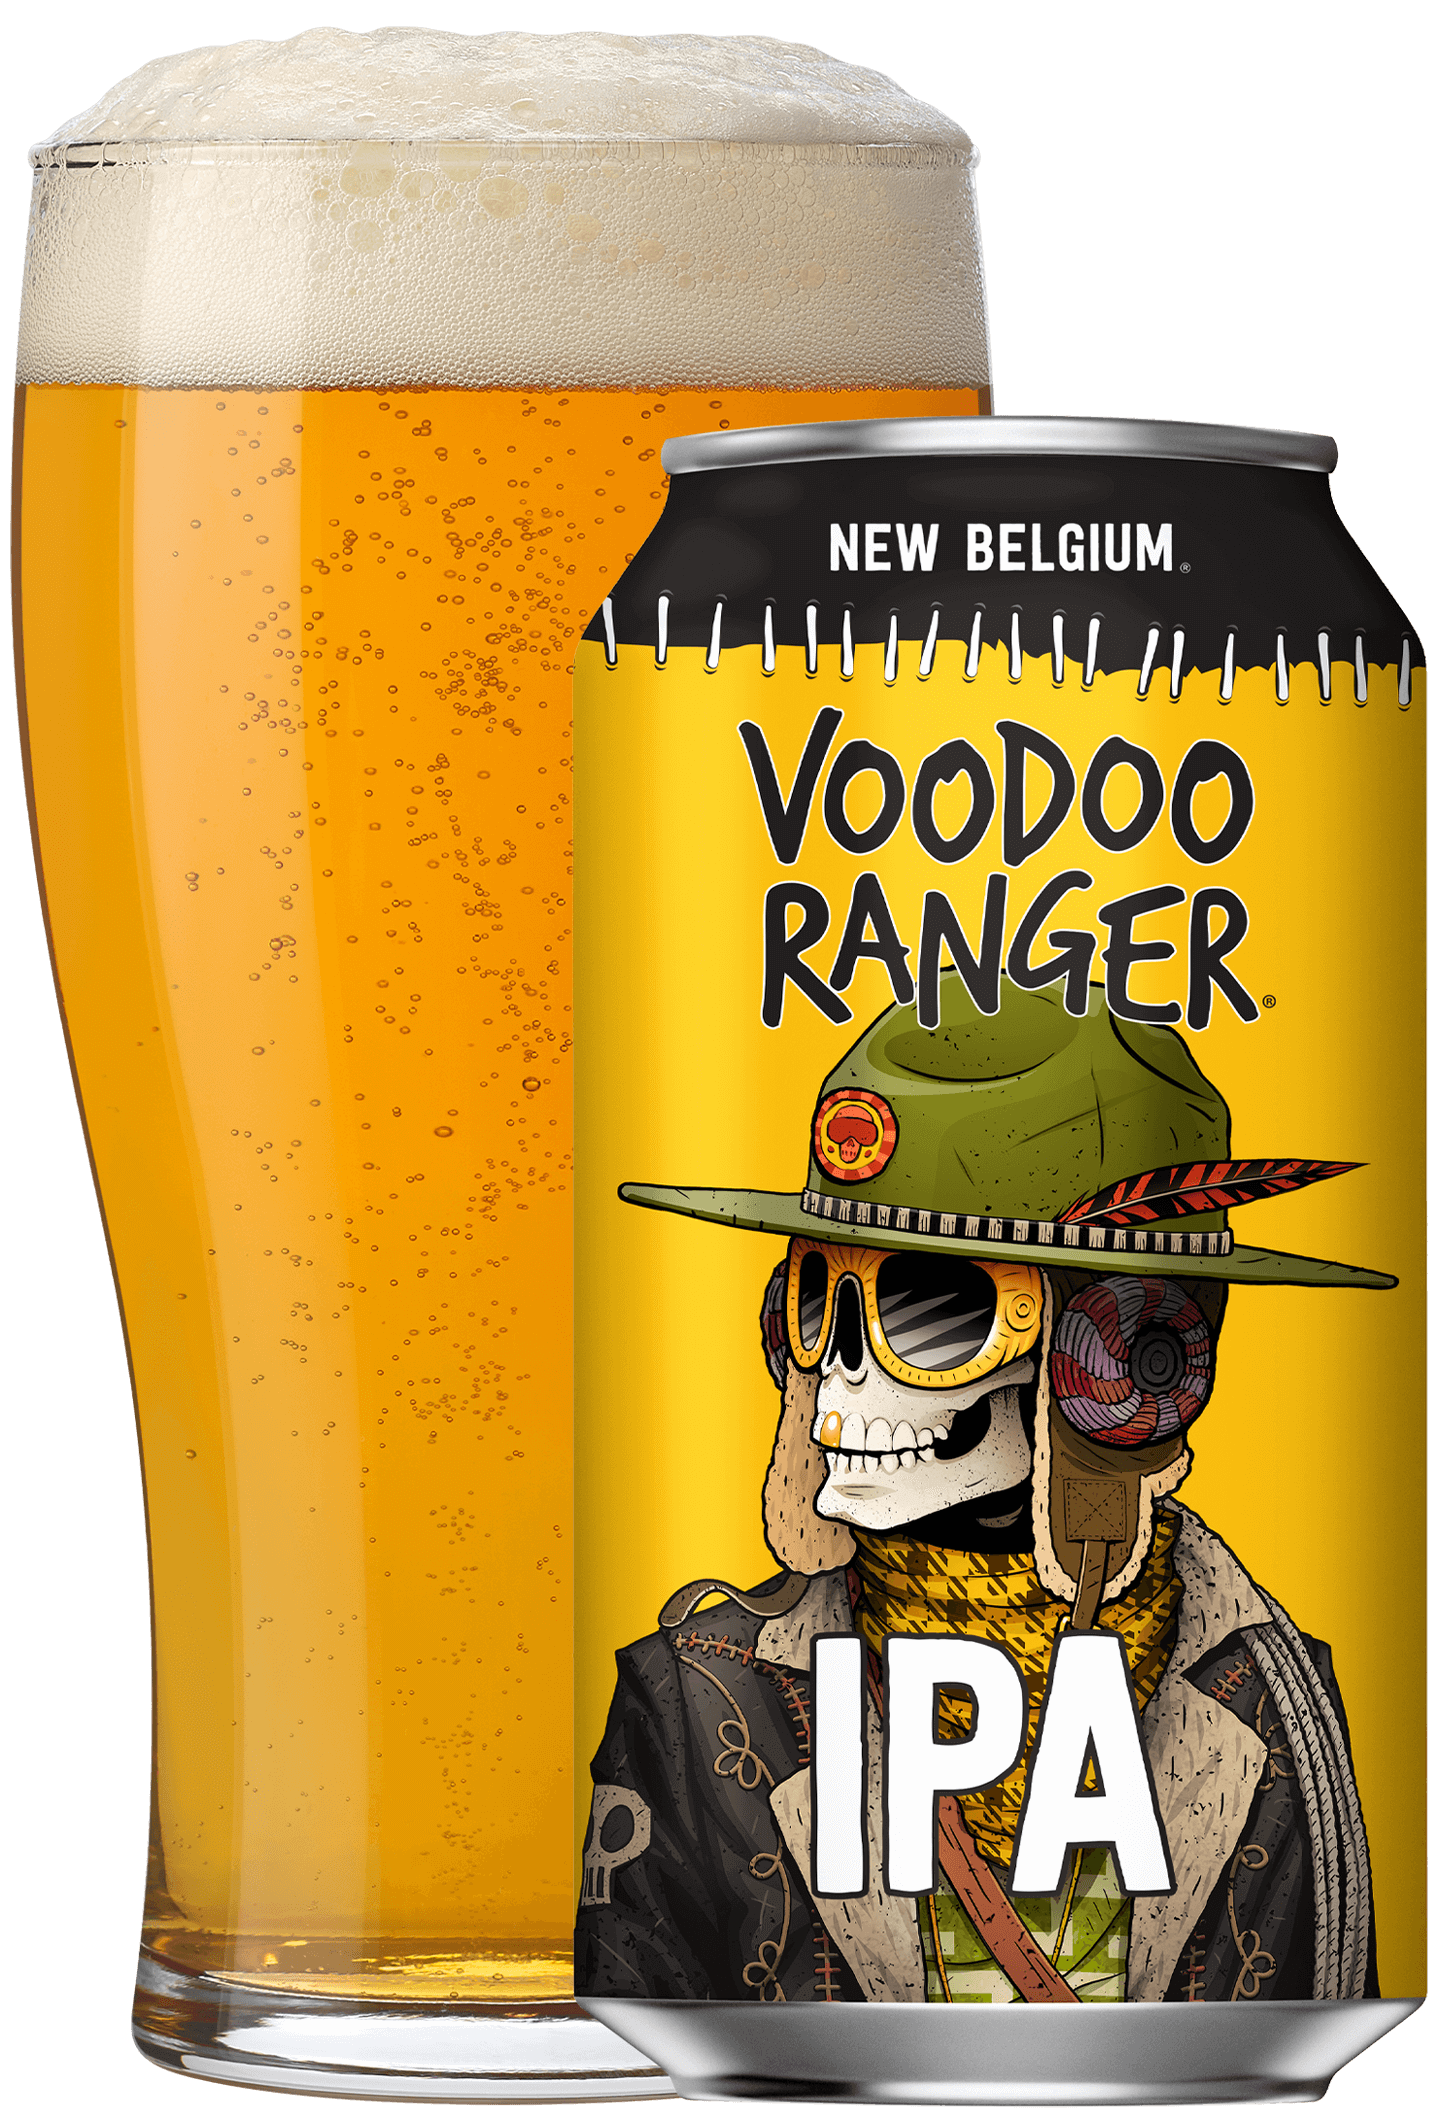 New Belgium Brewing Company's {"id":264,"brewery_id":143,"name":"Voodoo Ranger IPA","image":"voodoo-ranger-ipa.webp","slug":"new-belgium-brewing-company\/voodoo-ranger-ipa","calories":null,"abv":"7","ibu":50,"type":"Ale","style":"IPA","description":null,"available":"All Year","created_at":null,"updated_at":null,"brewery":{"id":143,"user_id":null,"name":"New Belgium Brewing Company","slug":null,"logo":null,"description":null,"website":"https:\/\/www.newbelgium.com\/","address":null,"facebook_url":null,"twitter_url":null,"instagram_url":null,"created_at":null,"updated_at":null}}